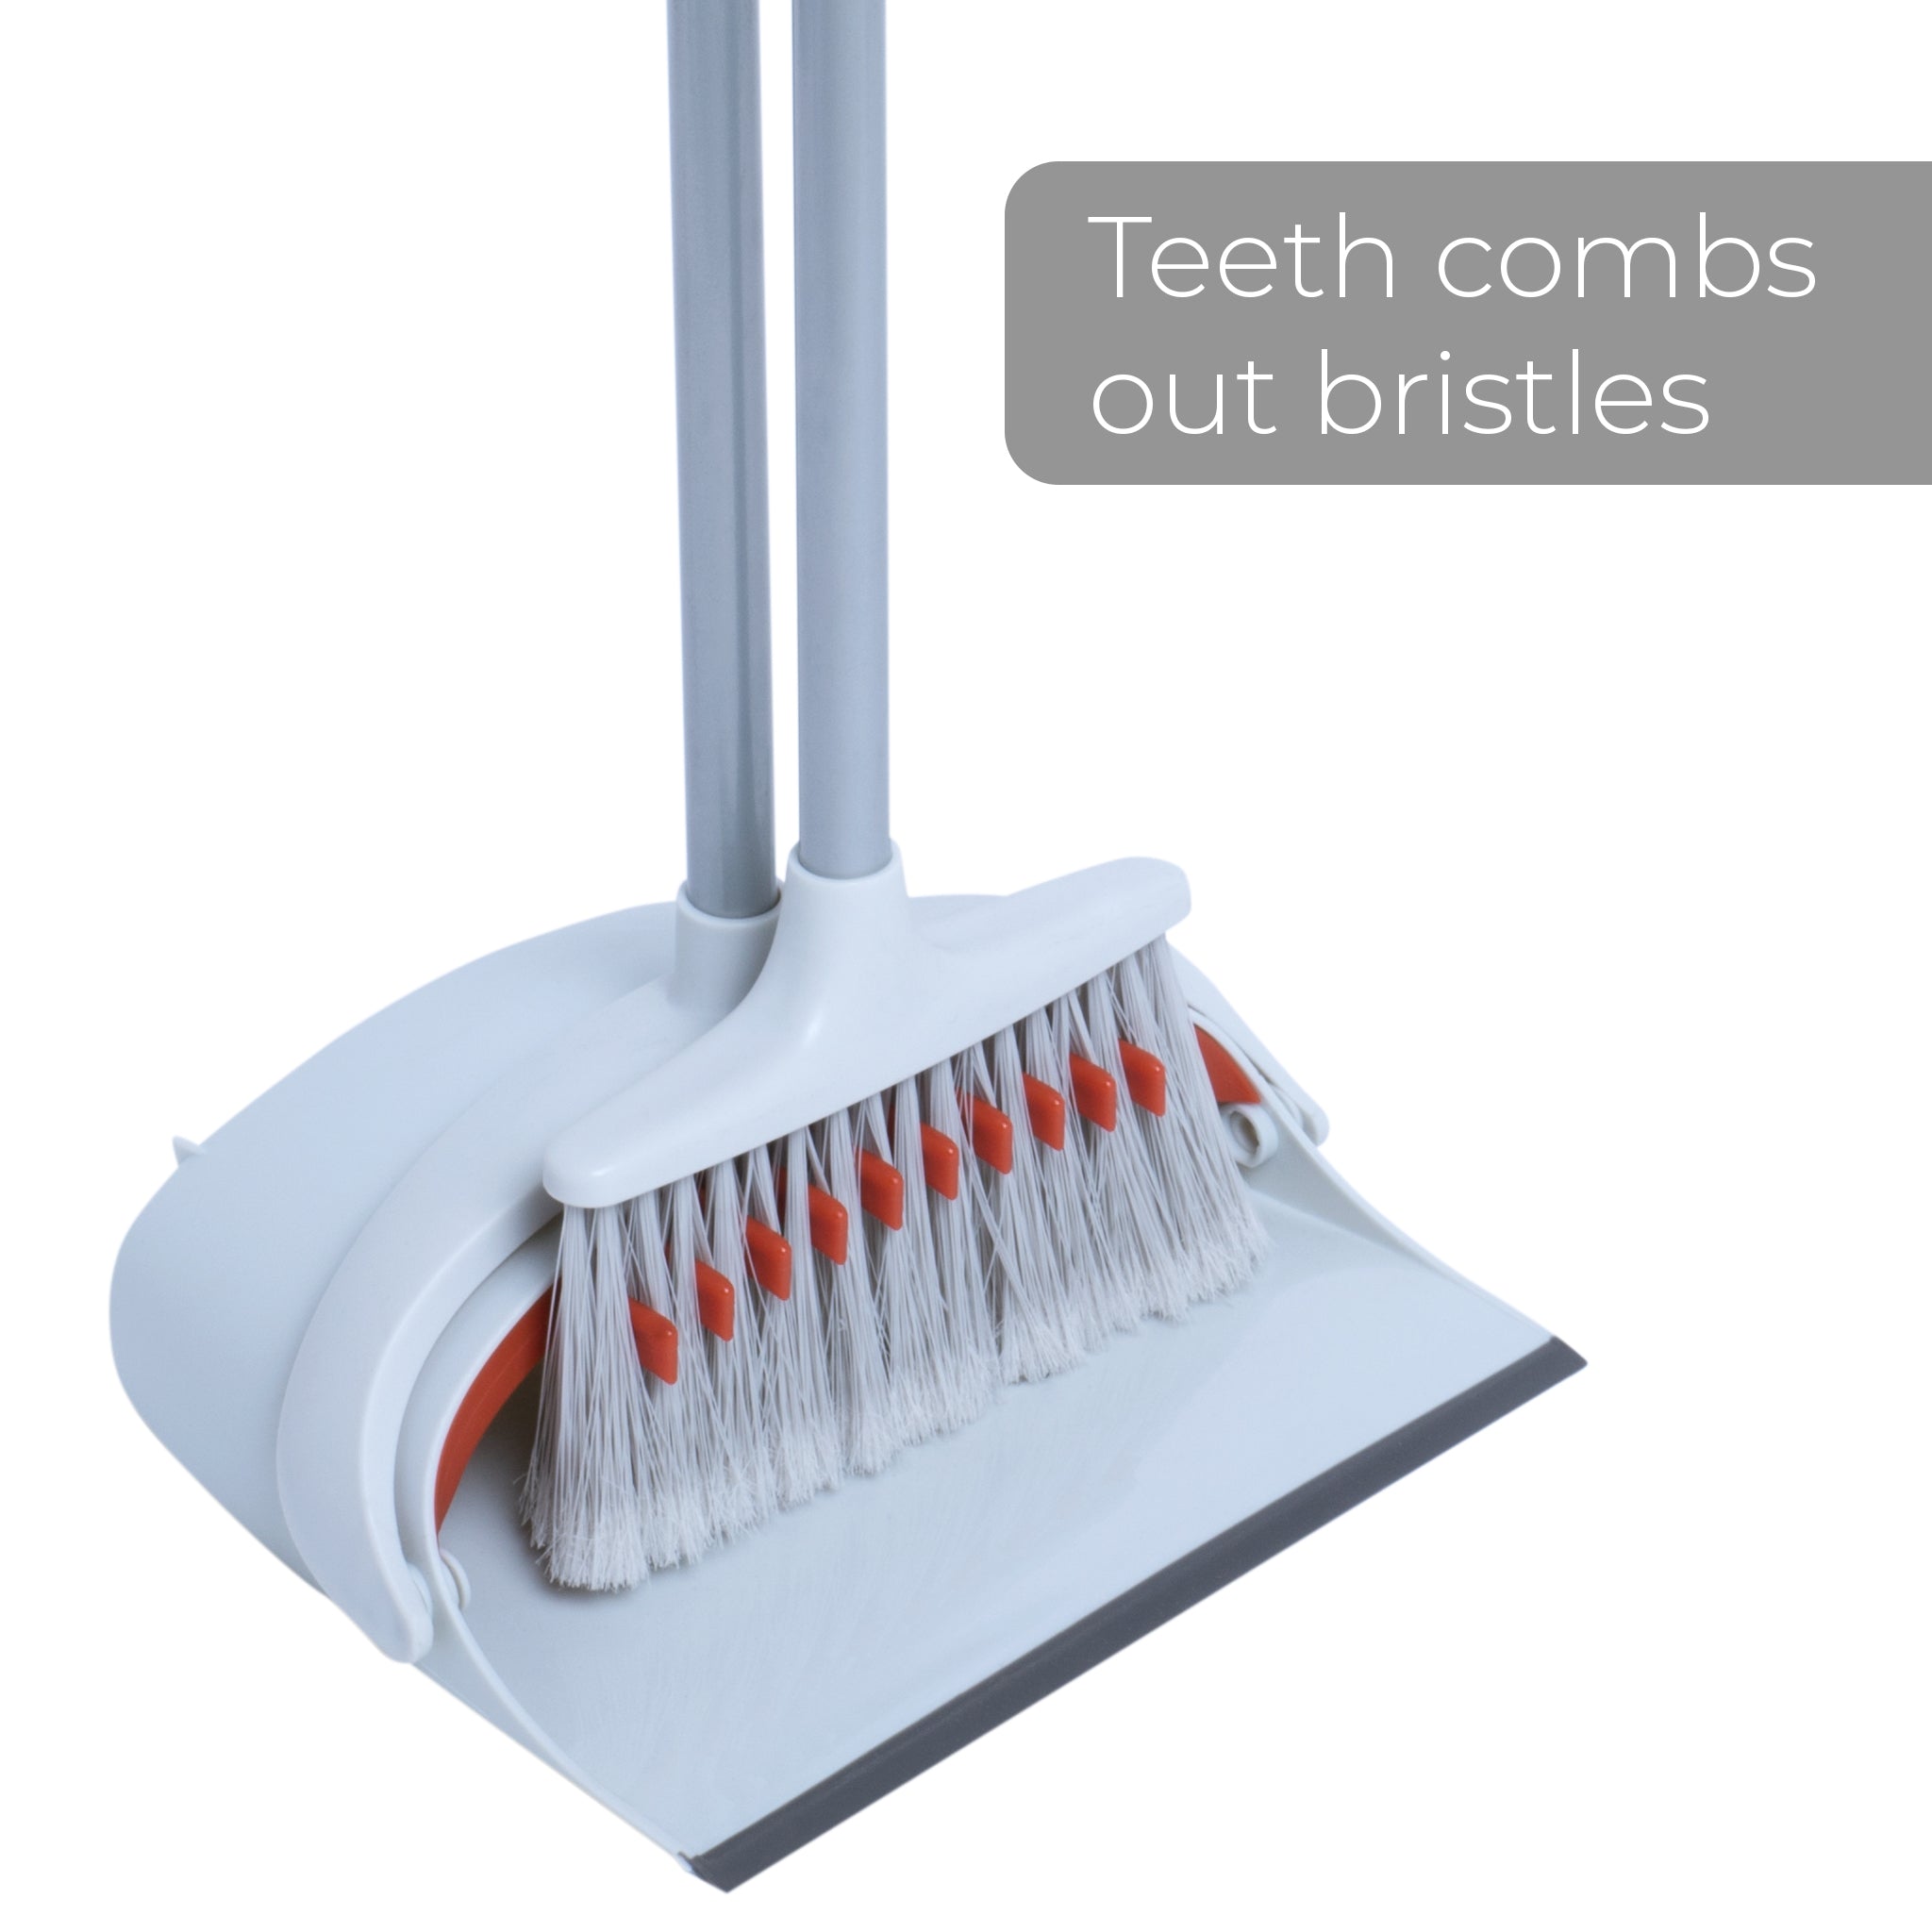 OXO Compact Dustpan and Brush Set